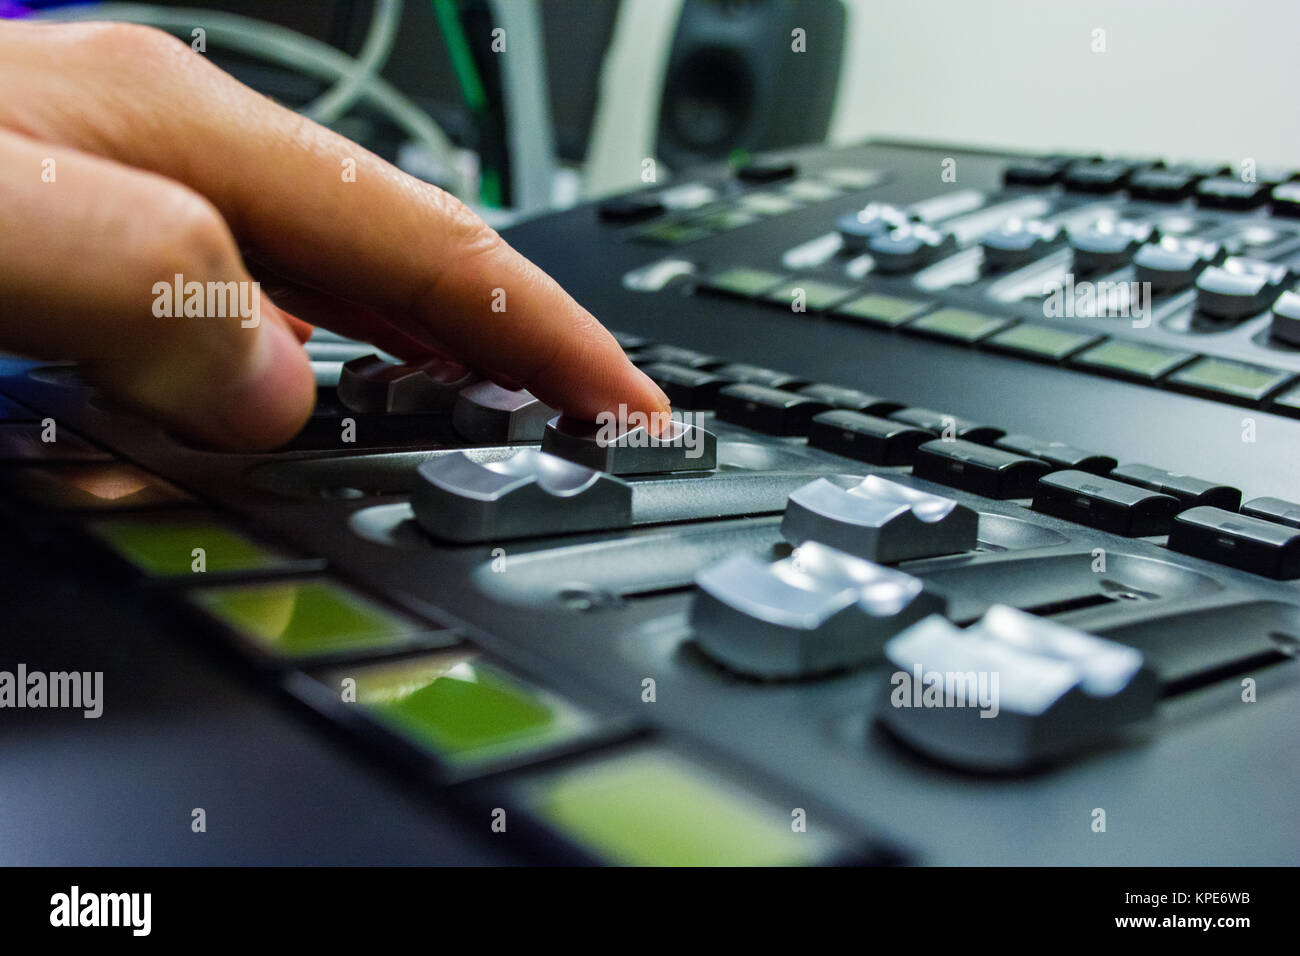 hand on a light, mixing desk fader in blur television gallery Stock Photo